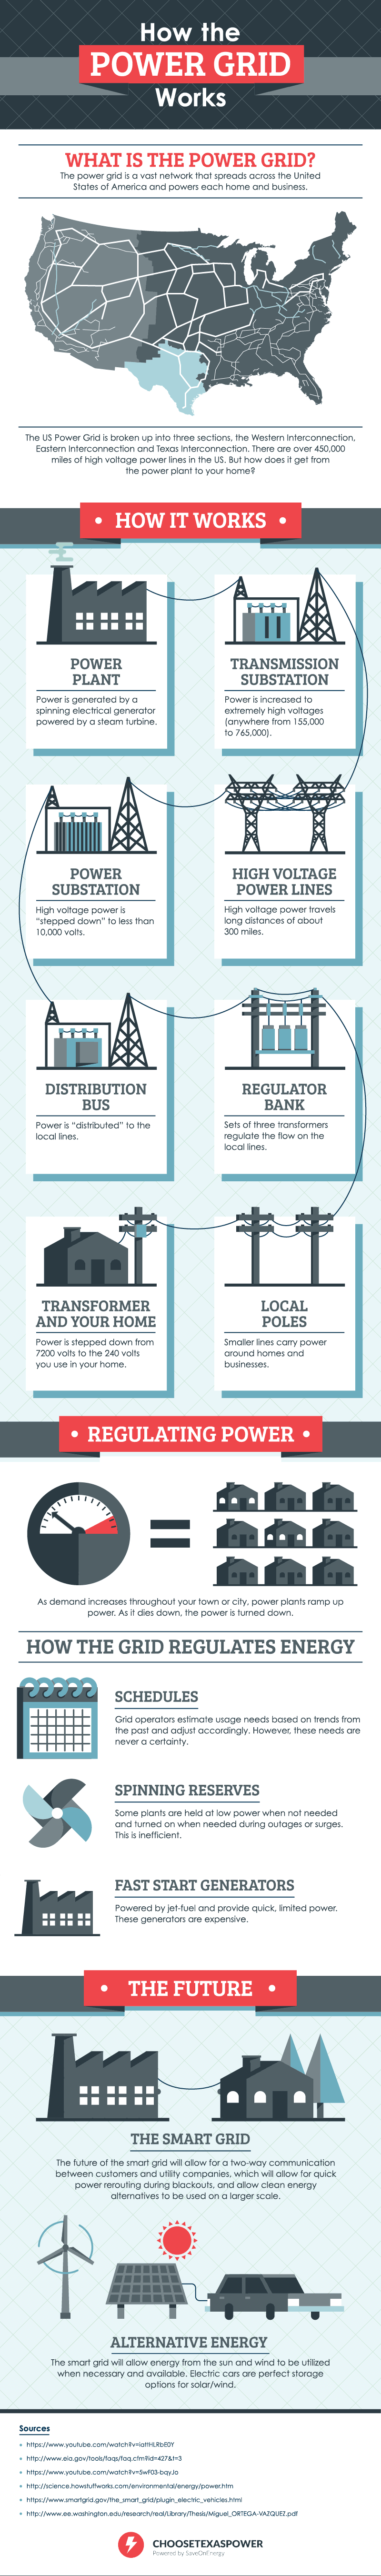 What Is the Power Grid?